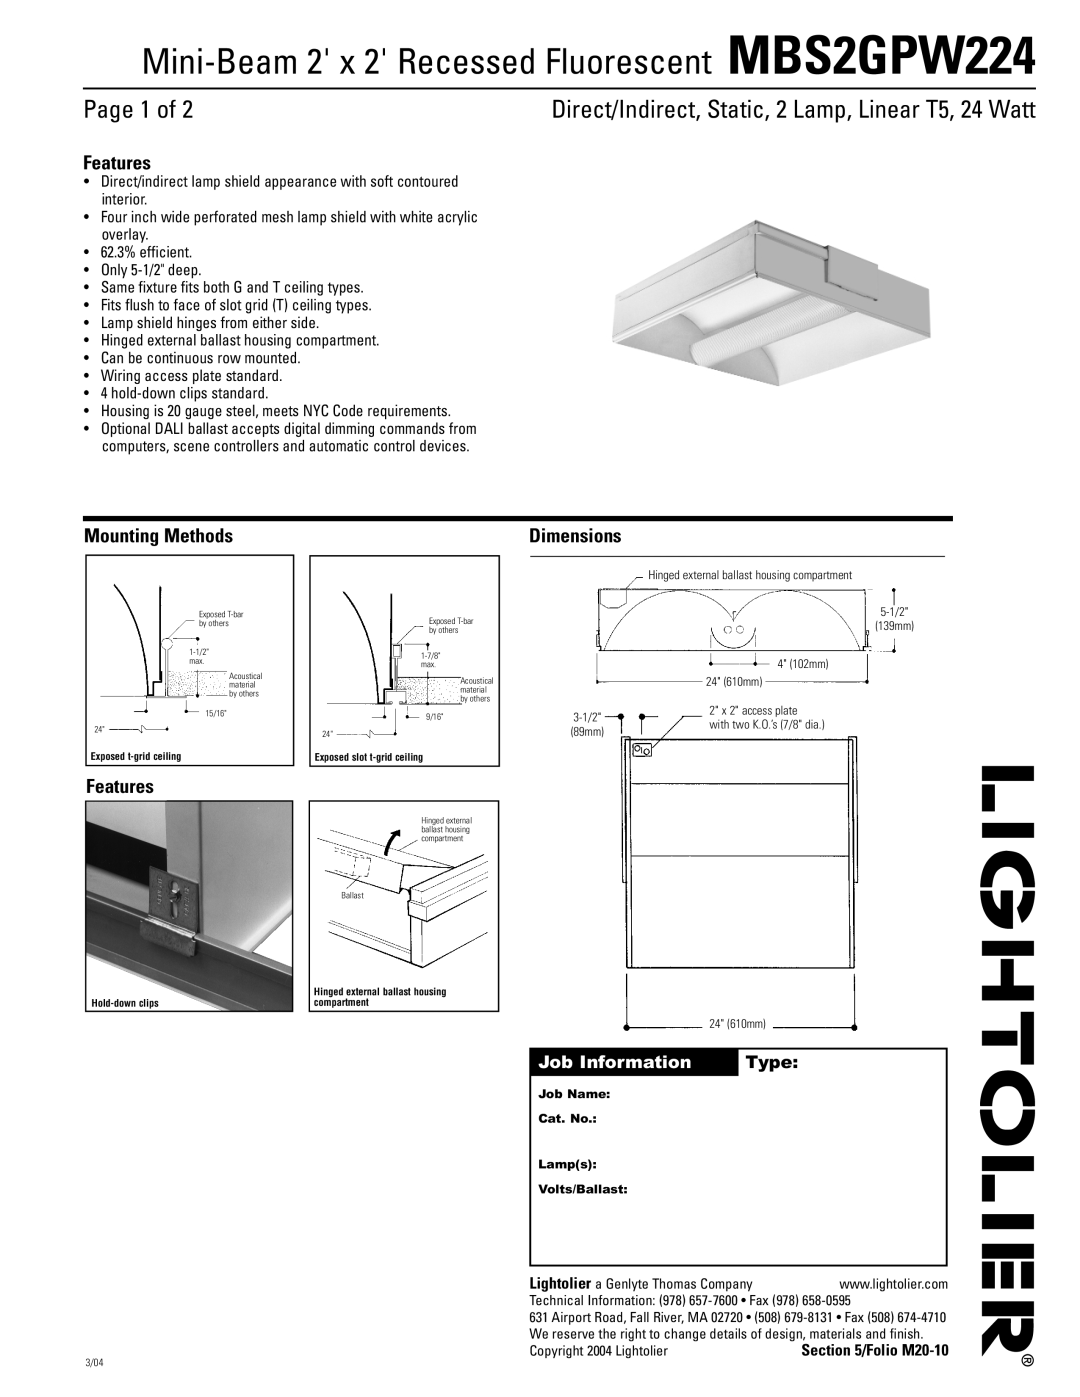 Lightolier MBS2GPW224 dimensions Page 1 of, Features, Mounting Methods, Dimensions, Job Information Type 